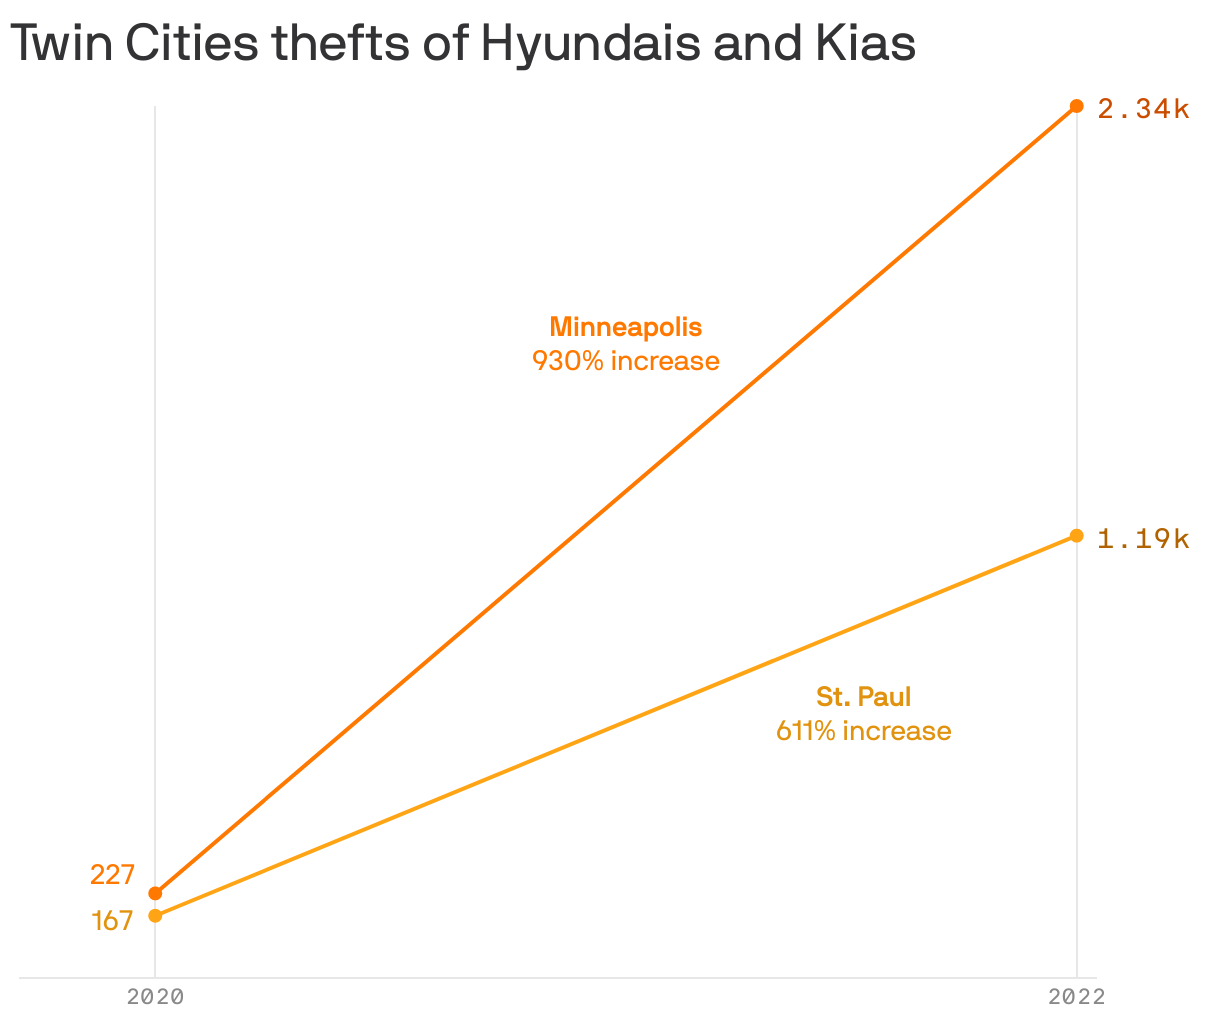 Twin Cities thefts of Hyundais and Kias